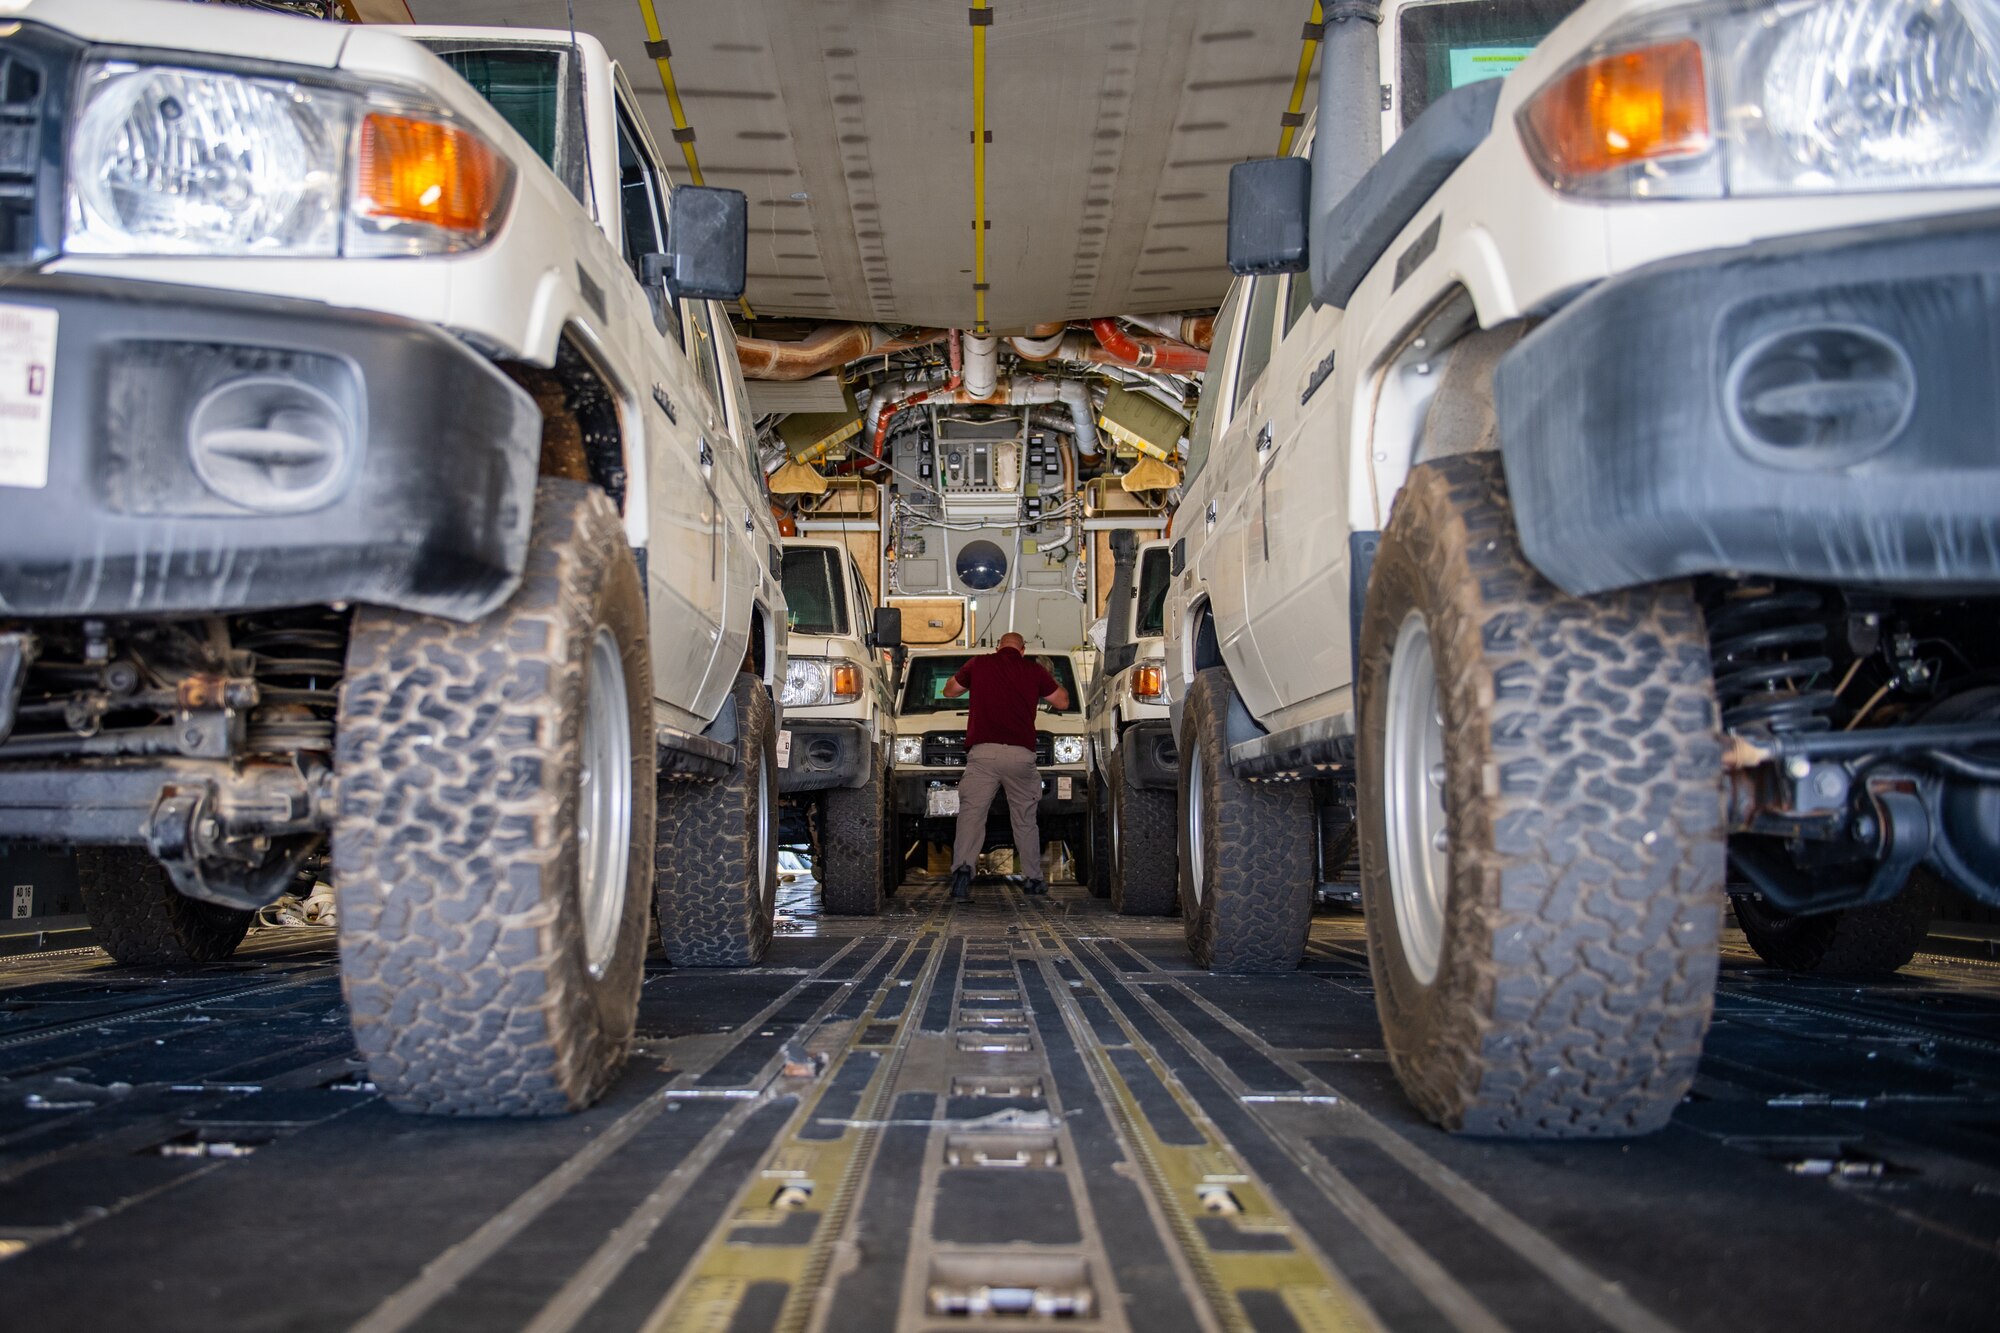 Tech. Sgt. Kyle Hersel, Assistant NCO-in-charge of Air Terminal Operations, Jordan Port, 387th Air Expeditionary Squadron, confirms the cargo manifest for a delivery of vehicles in Jordan, Oct. 14, 2019.